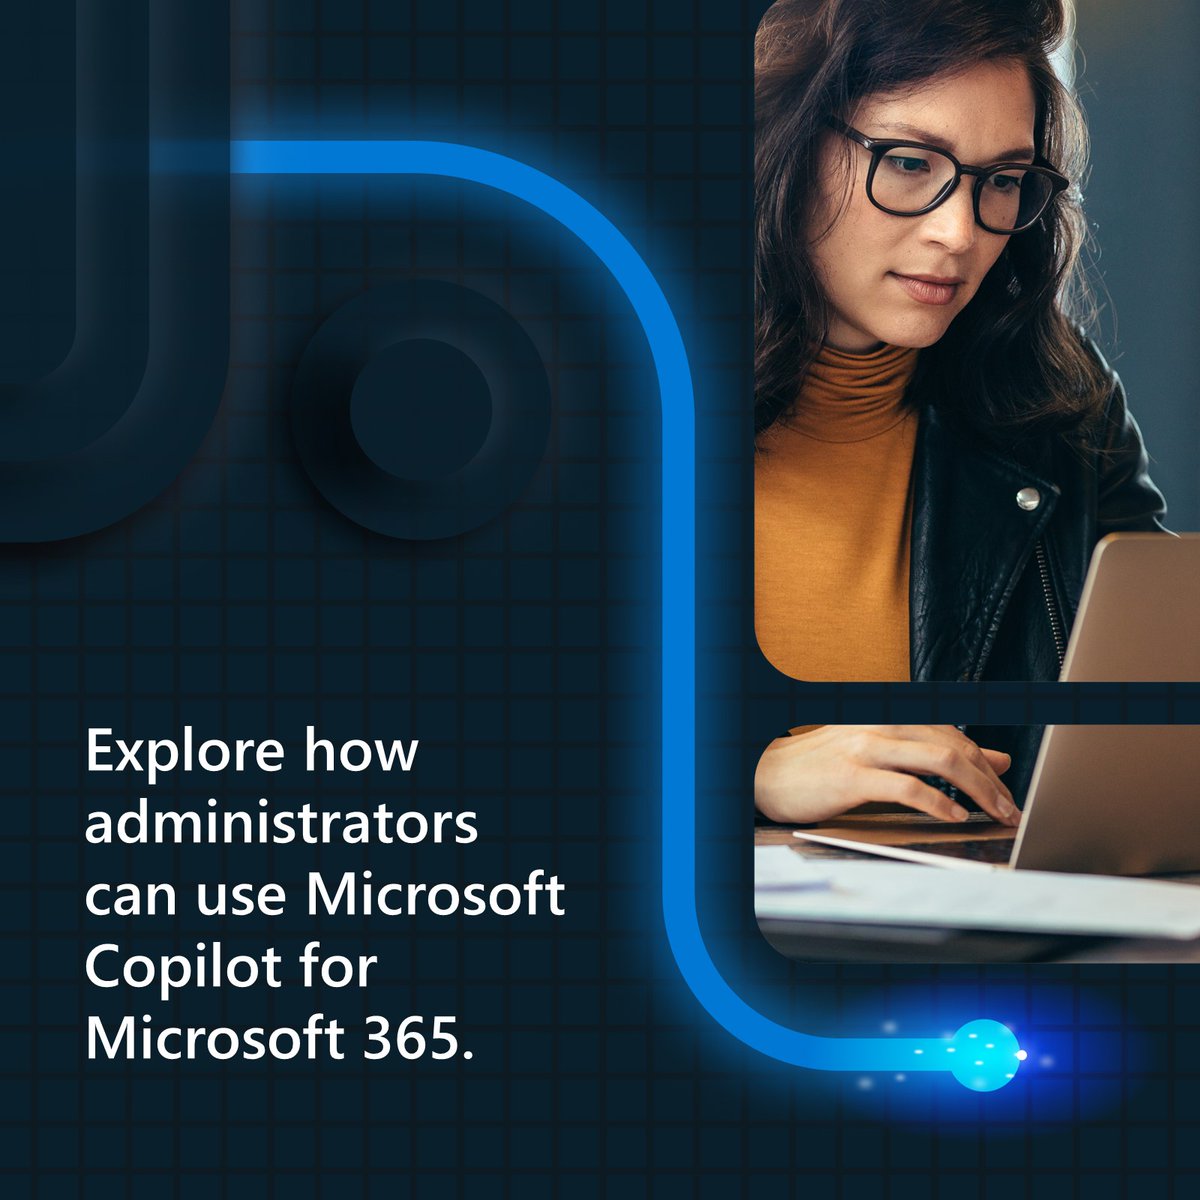 Admins new to Microsoft Copilot for Microsoft 365, start here. 📍 Take Course MS-4006 to learn the security and compliance features that can help keep your organization's data protected: msft.it/6017YyMHl #LearnMicrosoftAI